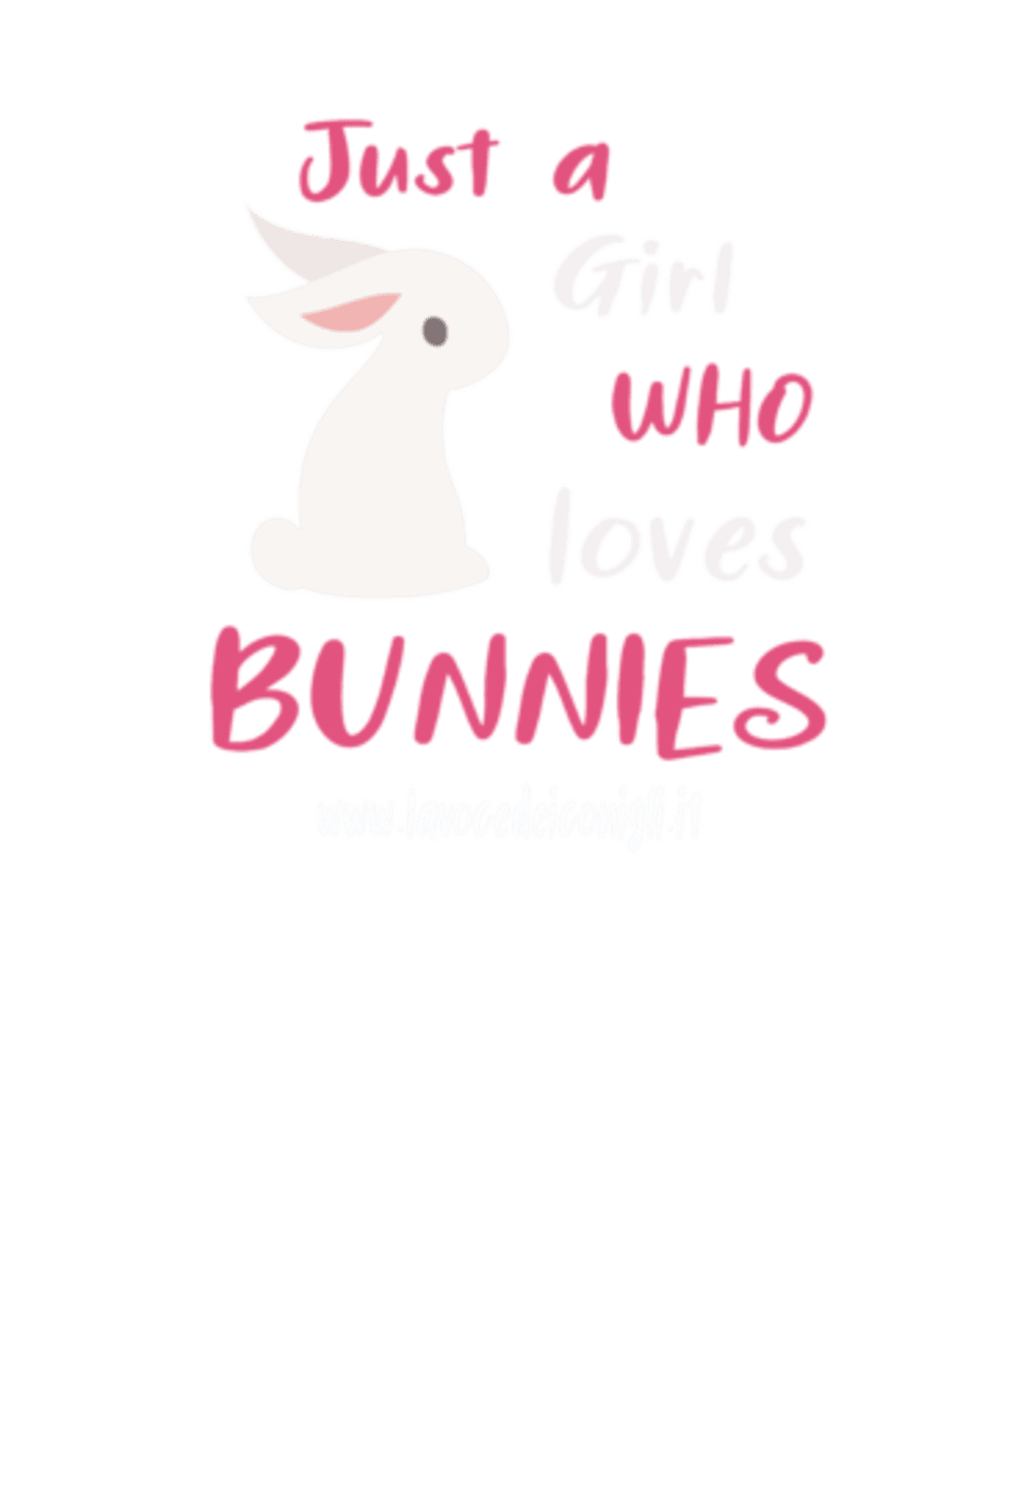 JUST A GIRL WHO LOVES BUNNIES